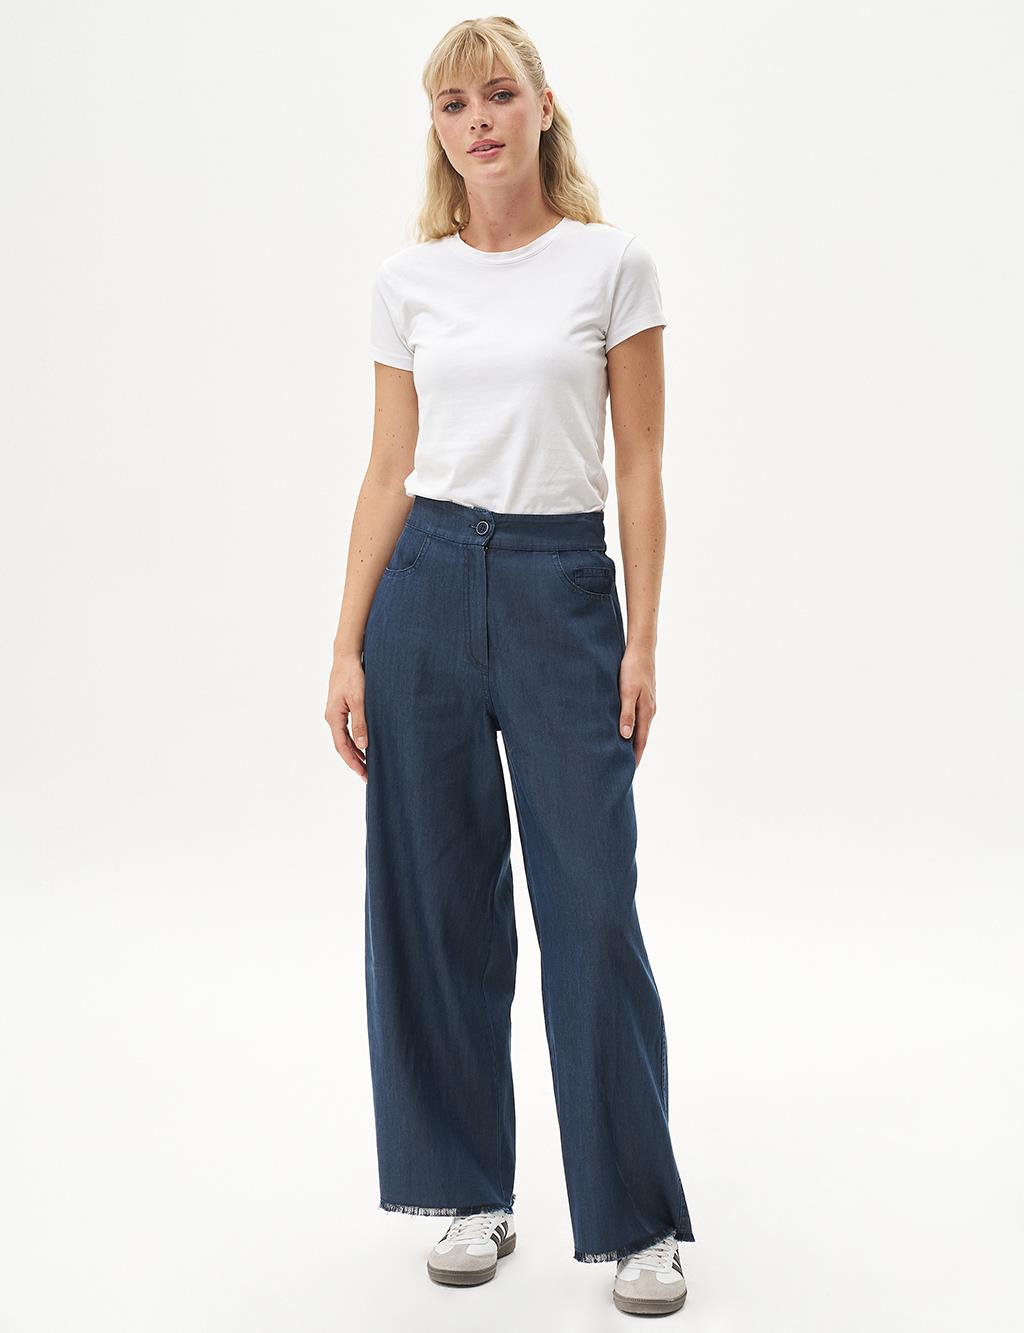 Lyocell Trousers with Tassels on the Legs Navy Blue